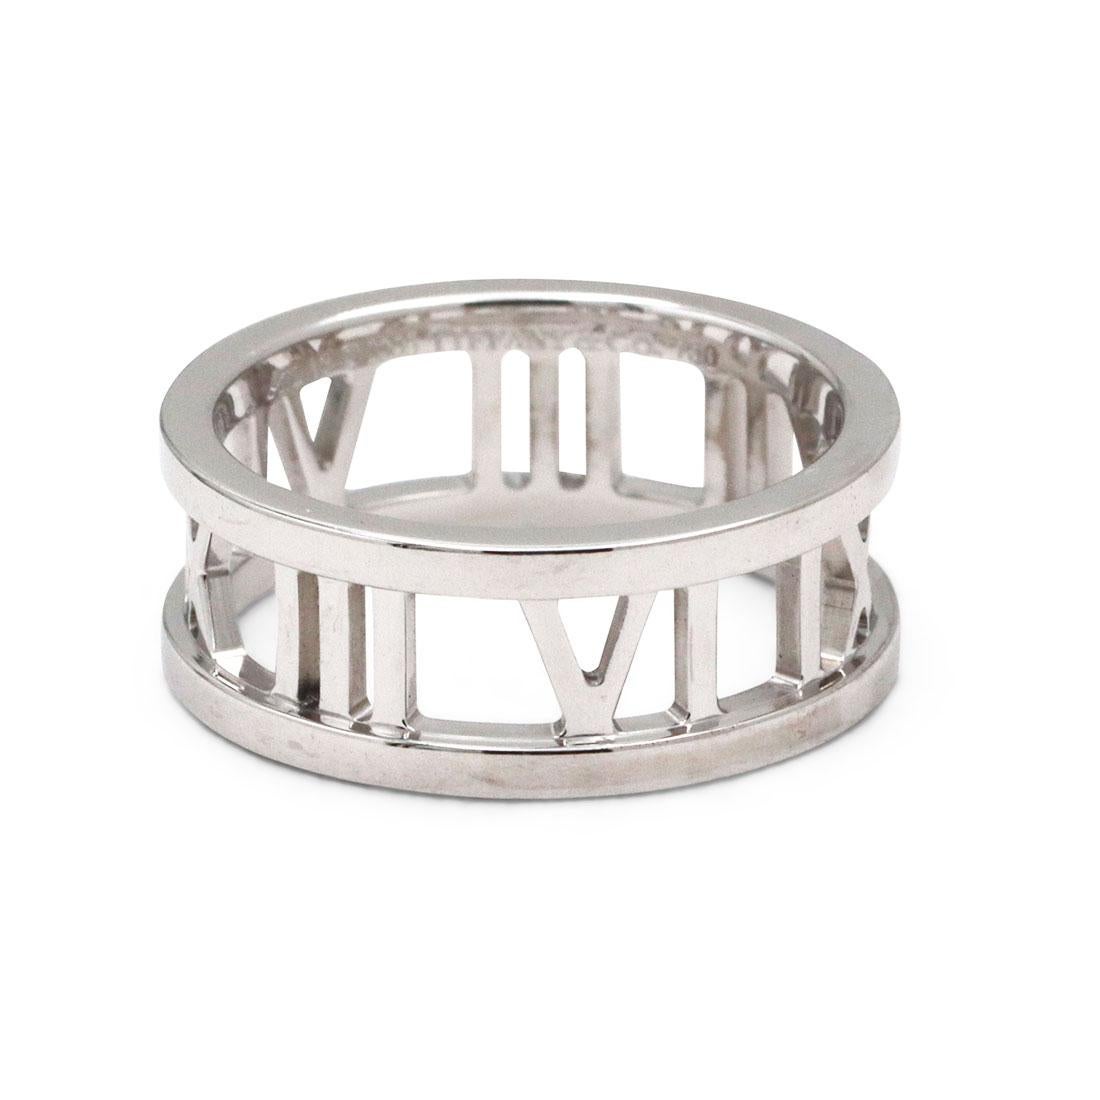 Authentic Tiffany & Co. Atlas ring, crafted in 18 karat white gold.  This classic ring is designed as a band and features Roman numeral designs. The band measures 6.8mm wide. Size 4 1/2. Signed Tiffany & Co, Atlas, 2003, 750. This ring is not